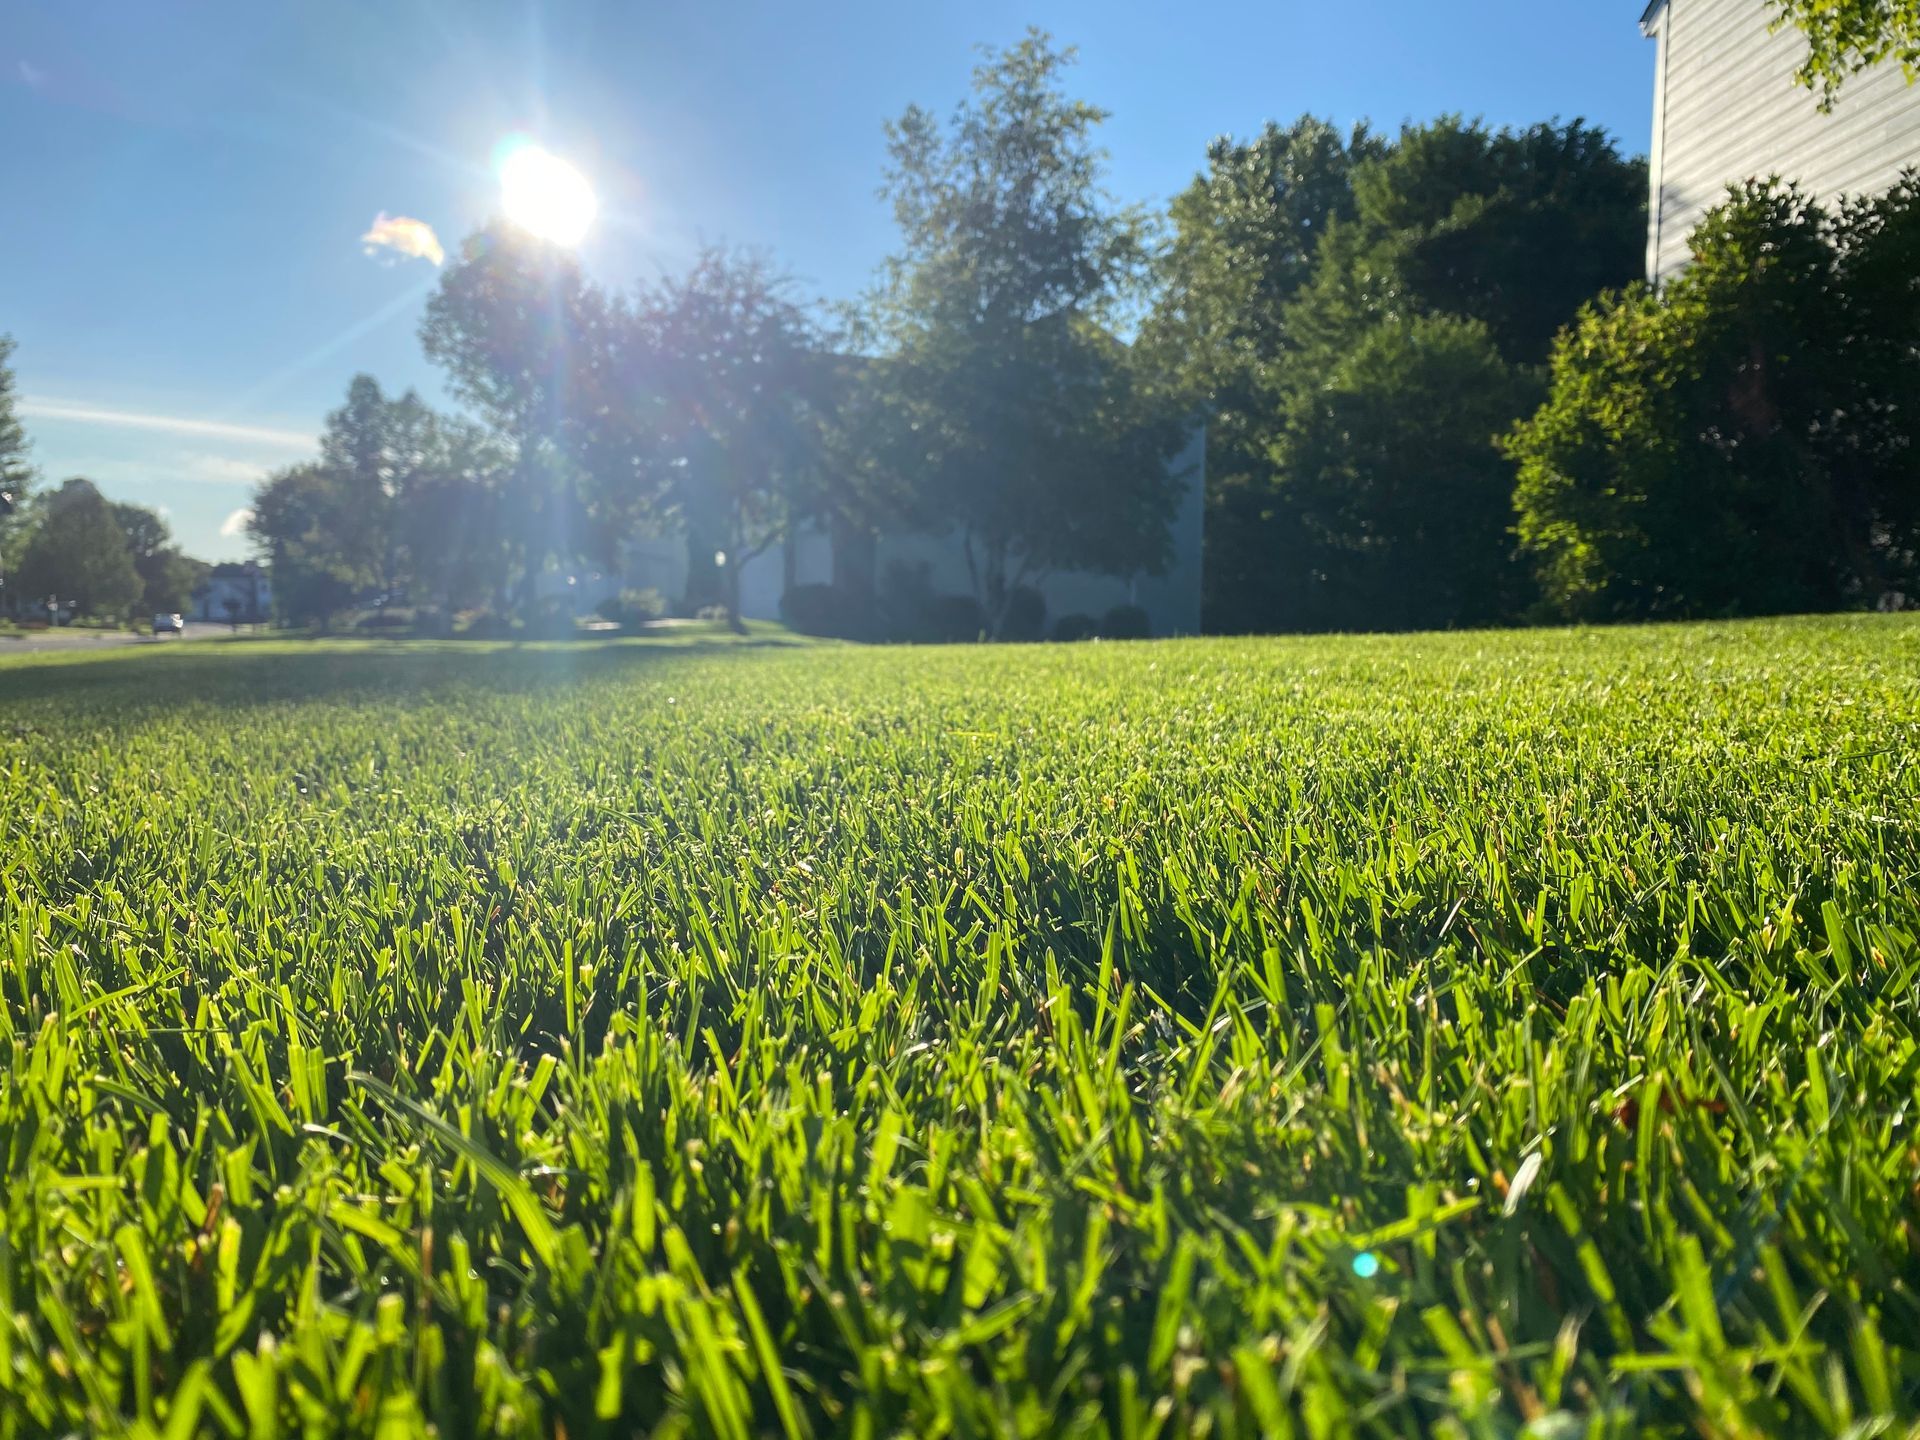 A lush green lawn with trees in the background and the sun shining through the grass.